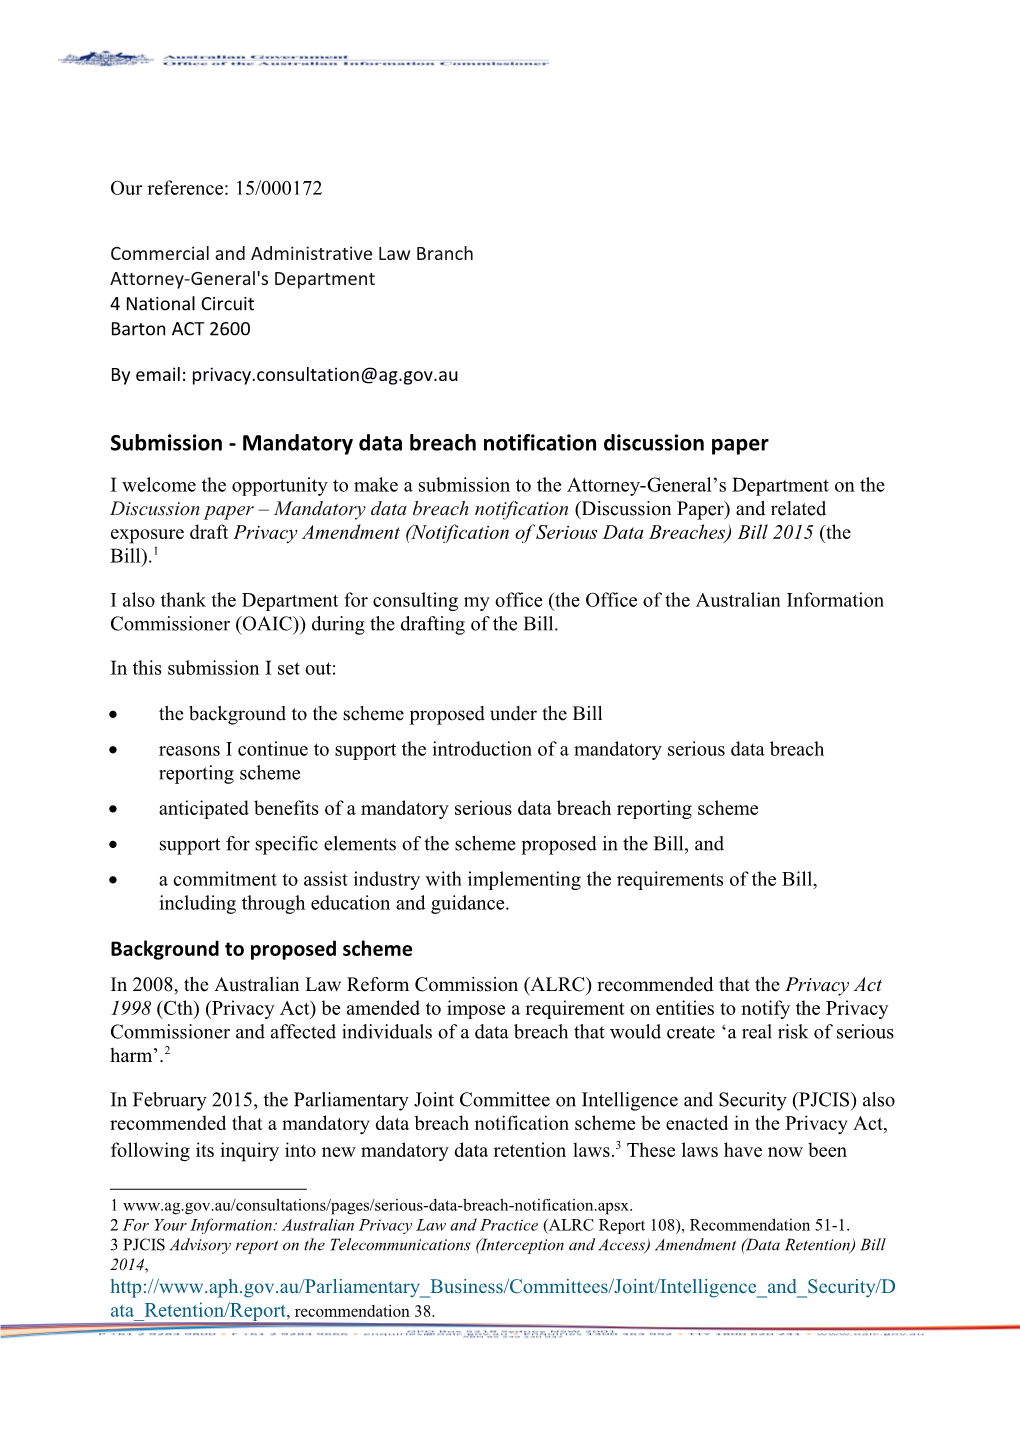 Serious Data Breach Notification Submission - Office of the Australian Information Commissioner